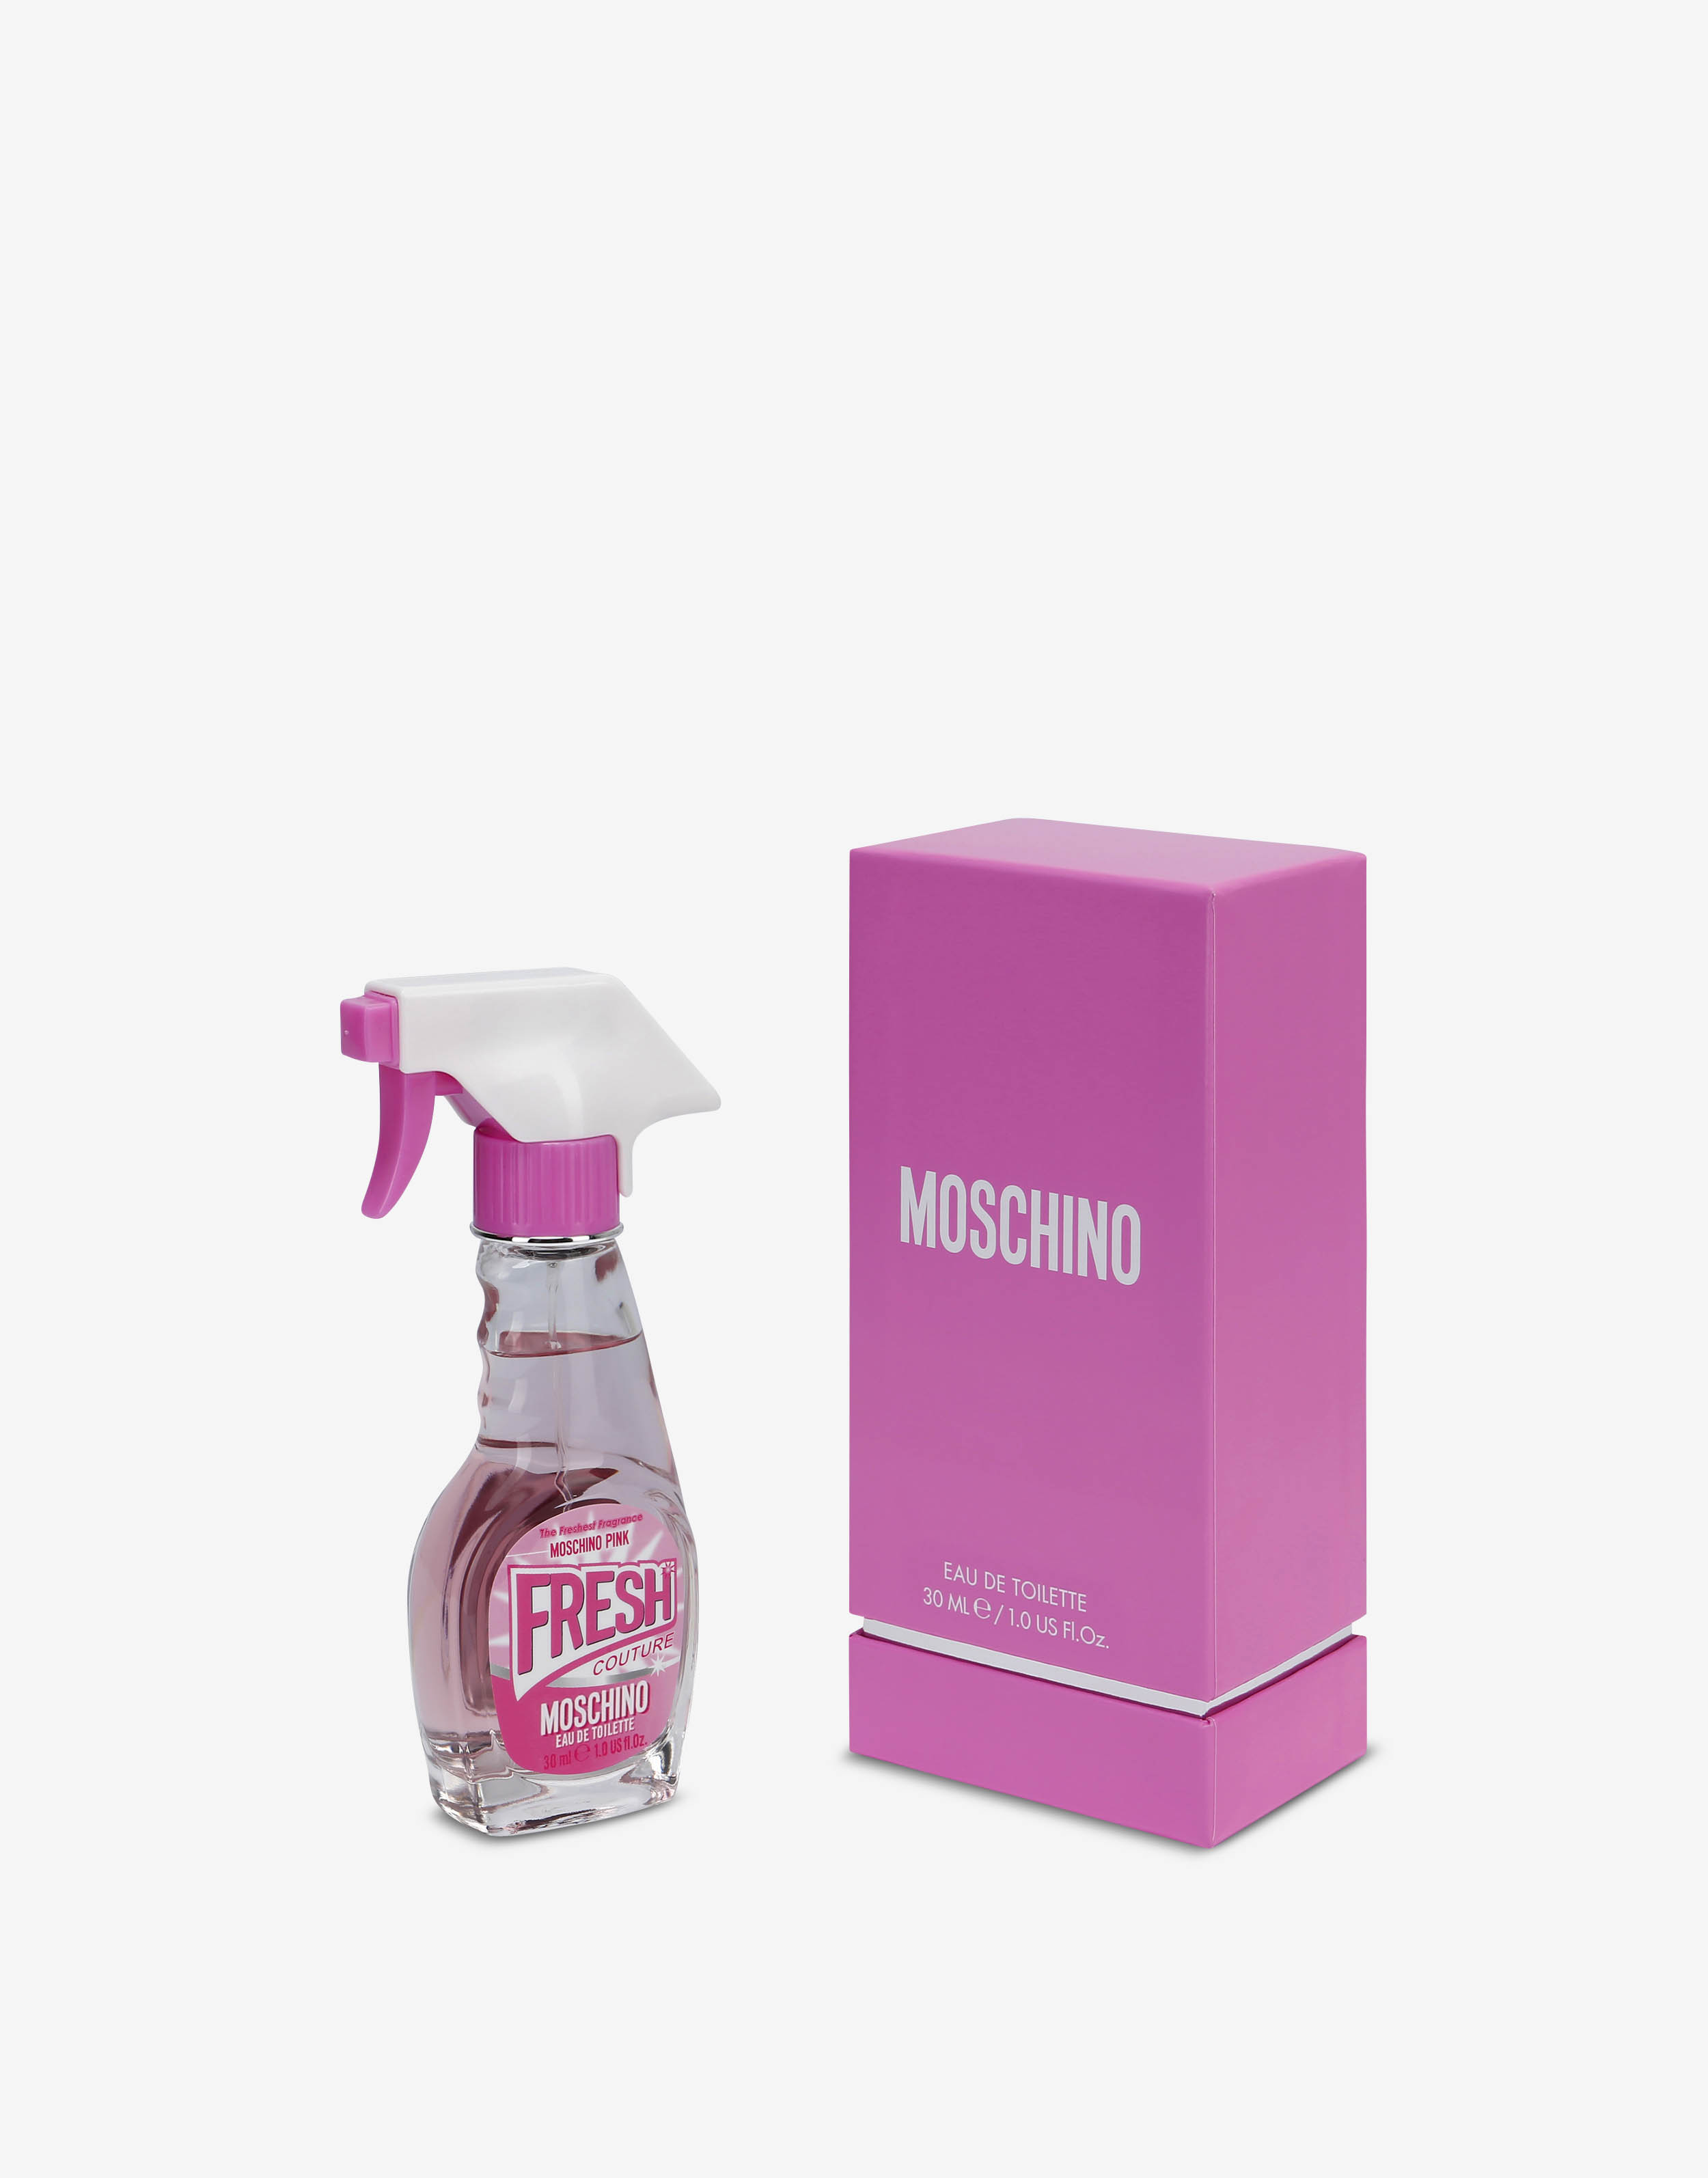 Moschino Pink Fresh Couture EDT 30ml